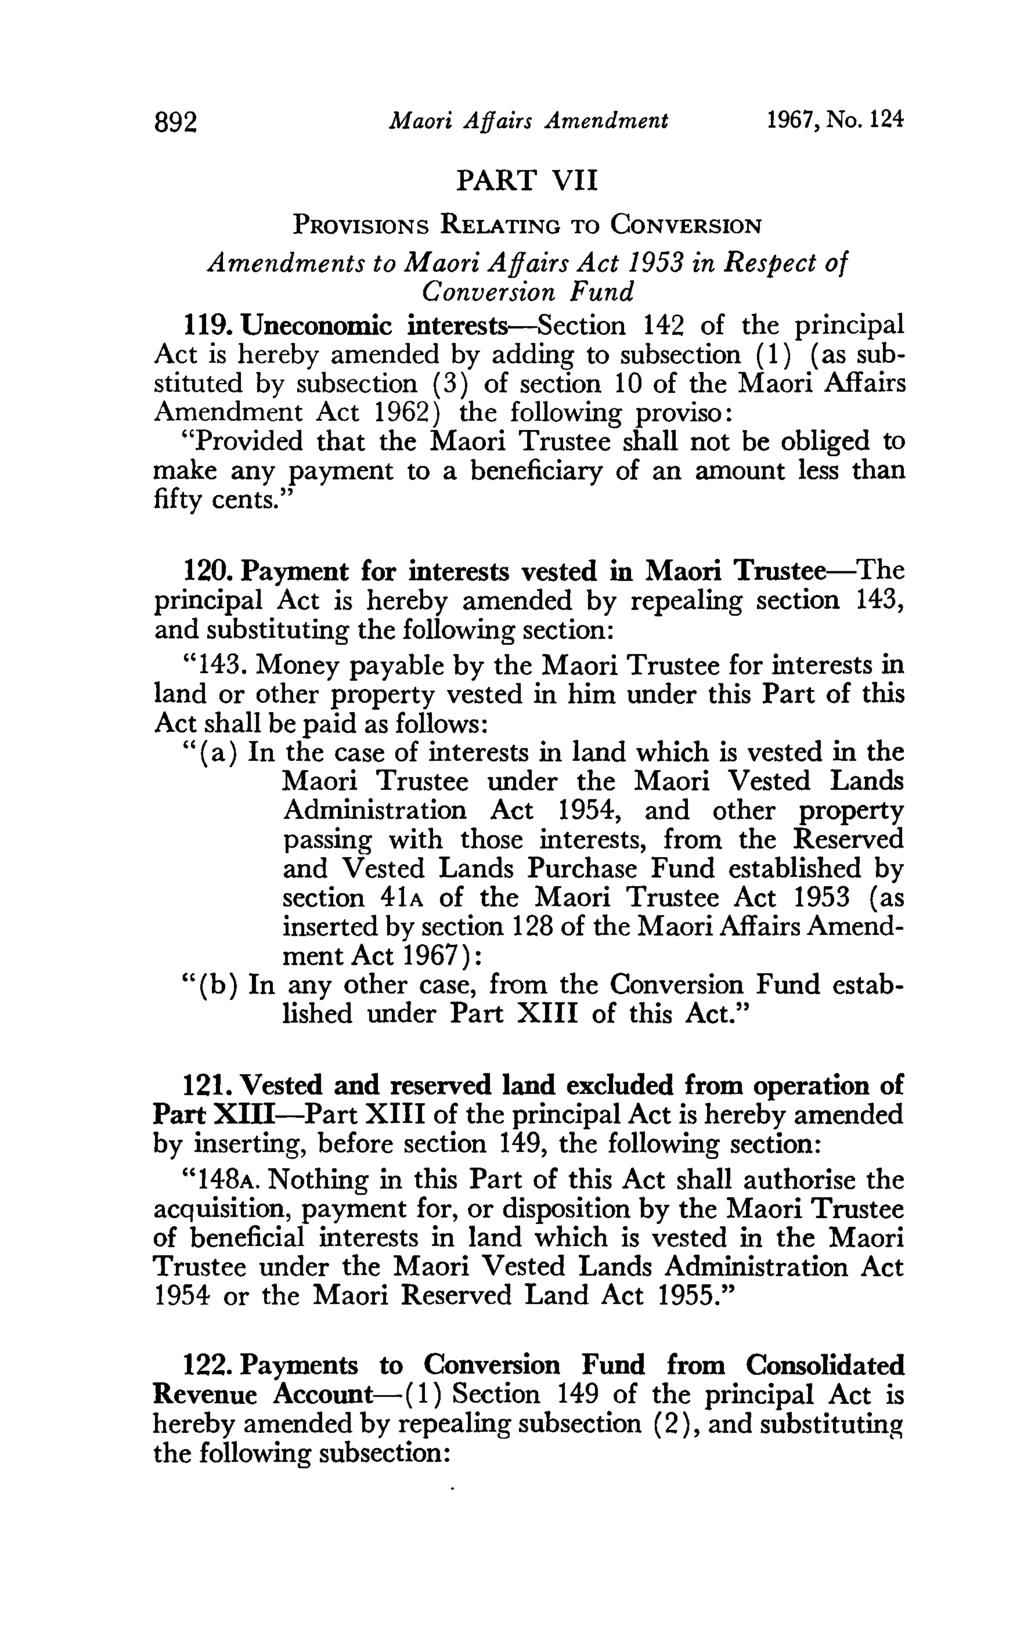 892 Maori Affairs Amendment 1967, No. 124 PART VII PROVISIONS RELATING TO CONVERSION Amendments to Maori Affairs Act 1953 in Respect of Conversion Fund 119.